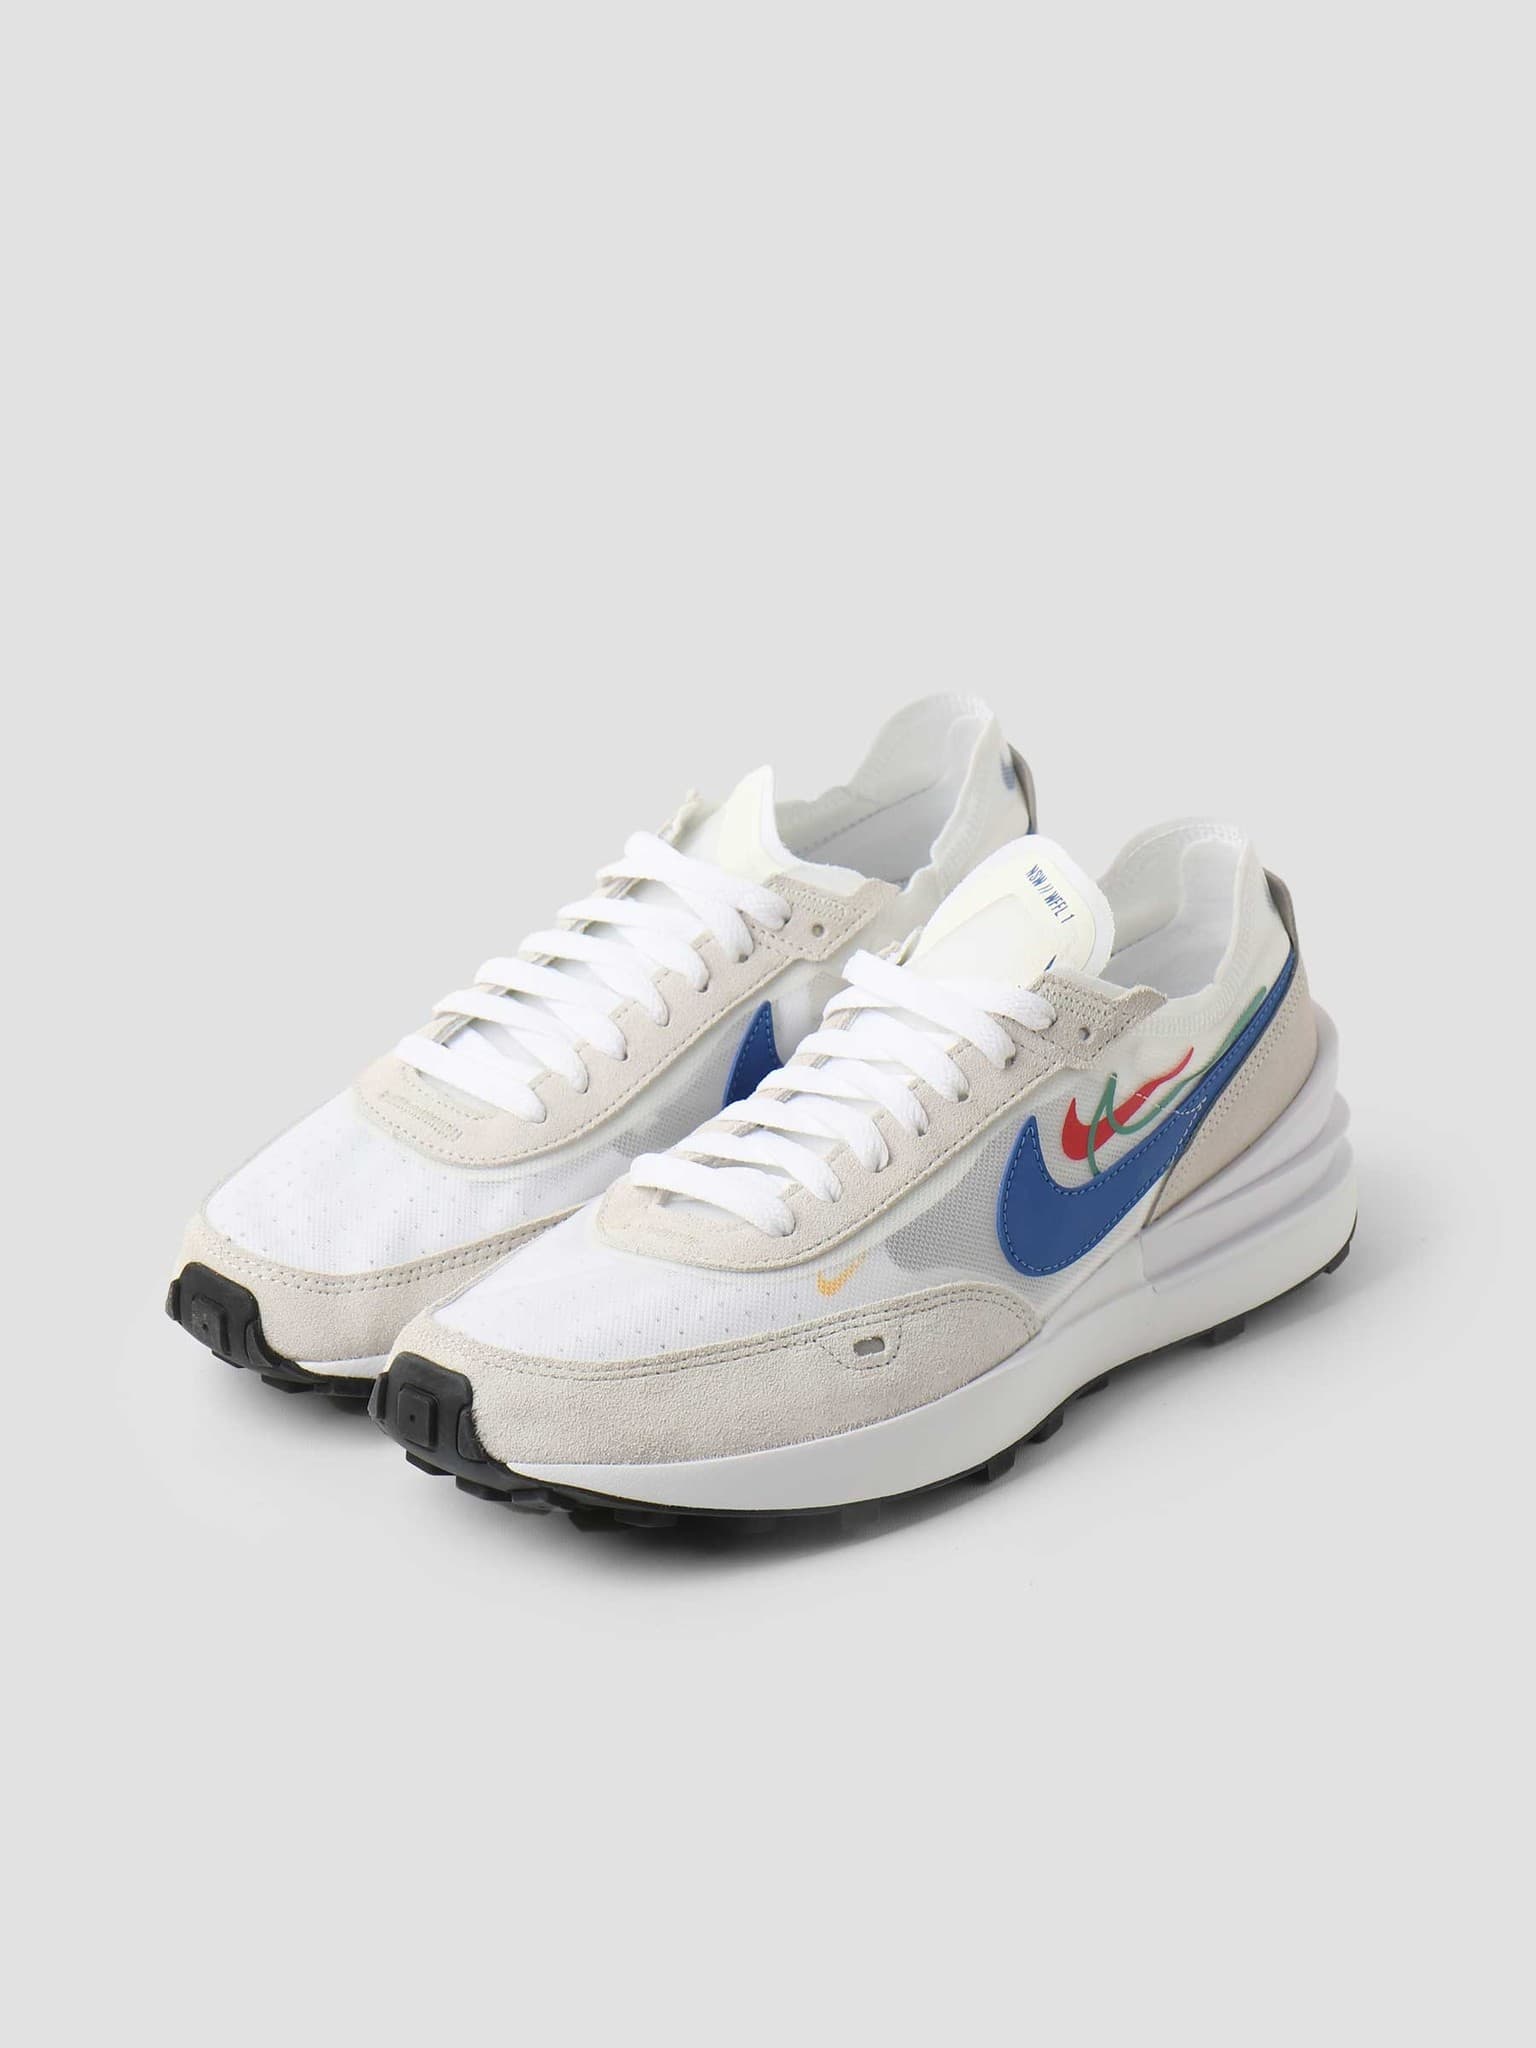 Nike Waffle One White Game Royal Sail University Red DN8019-100